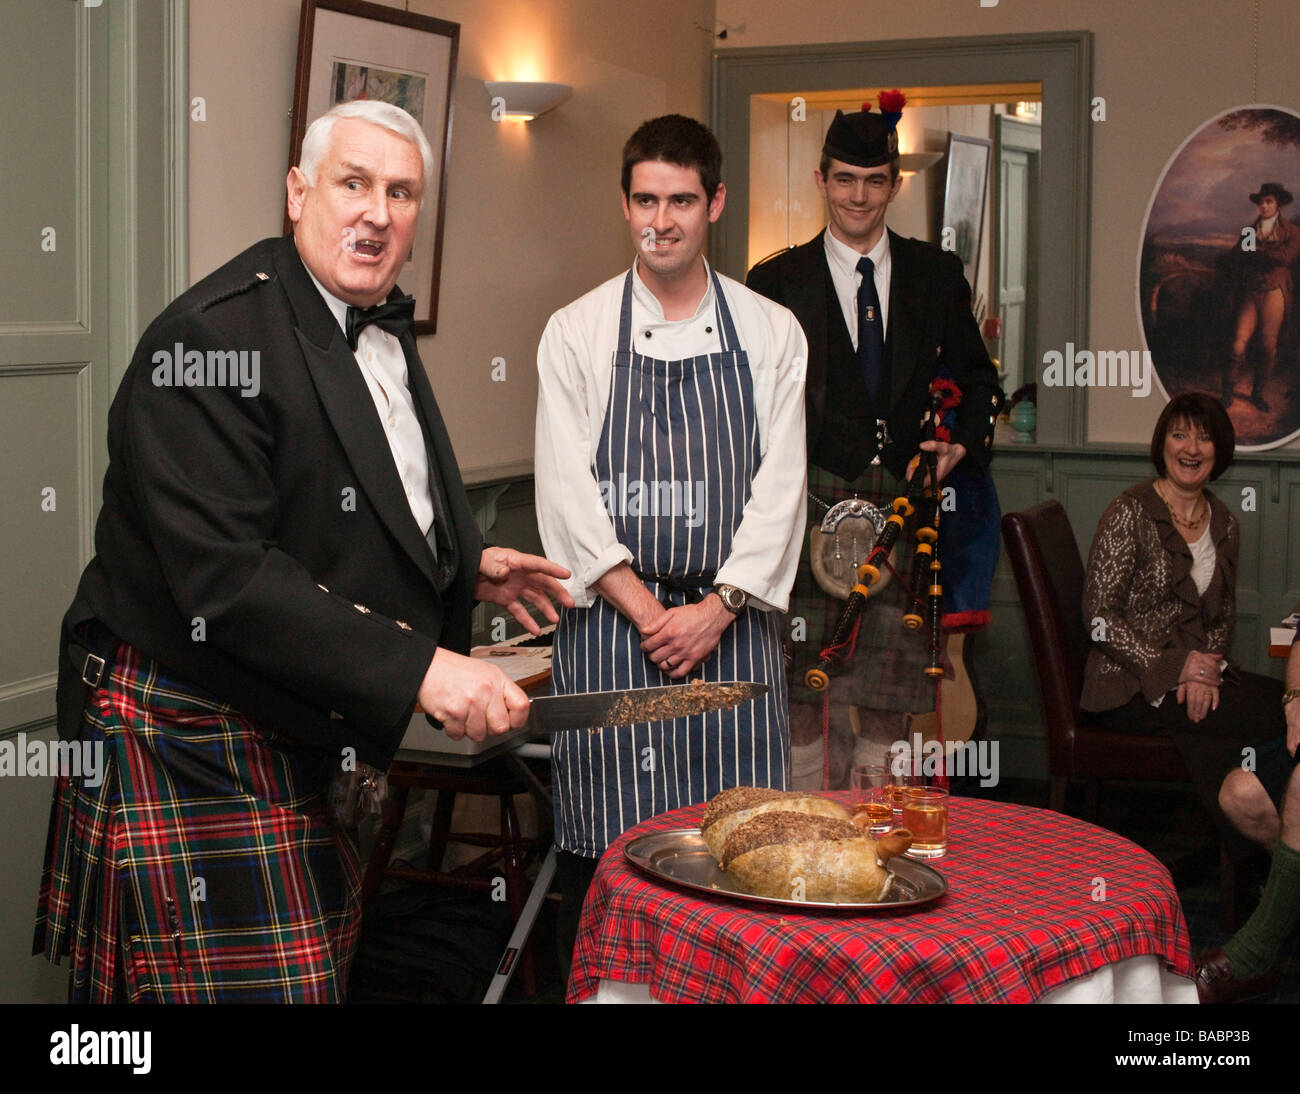 Address to the Haggis at a Burns night in Scotland Cobbles Inn Kelso Stock Photo